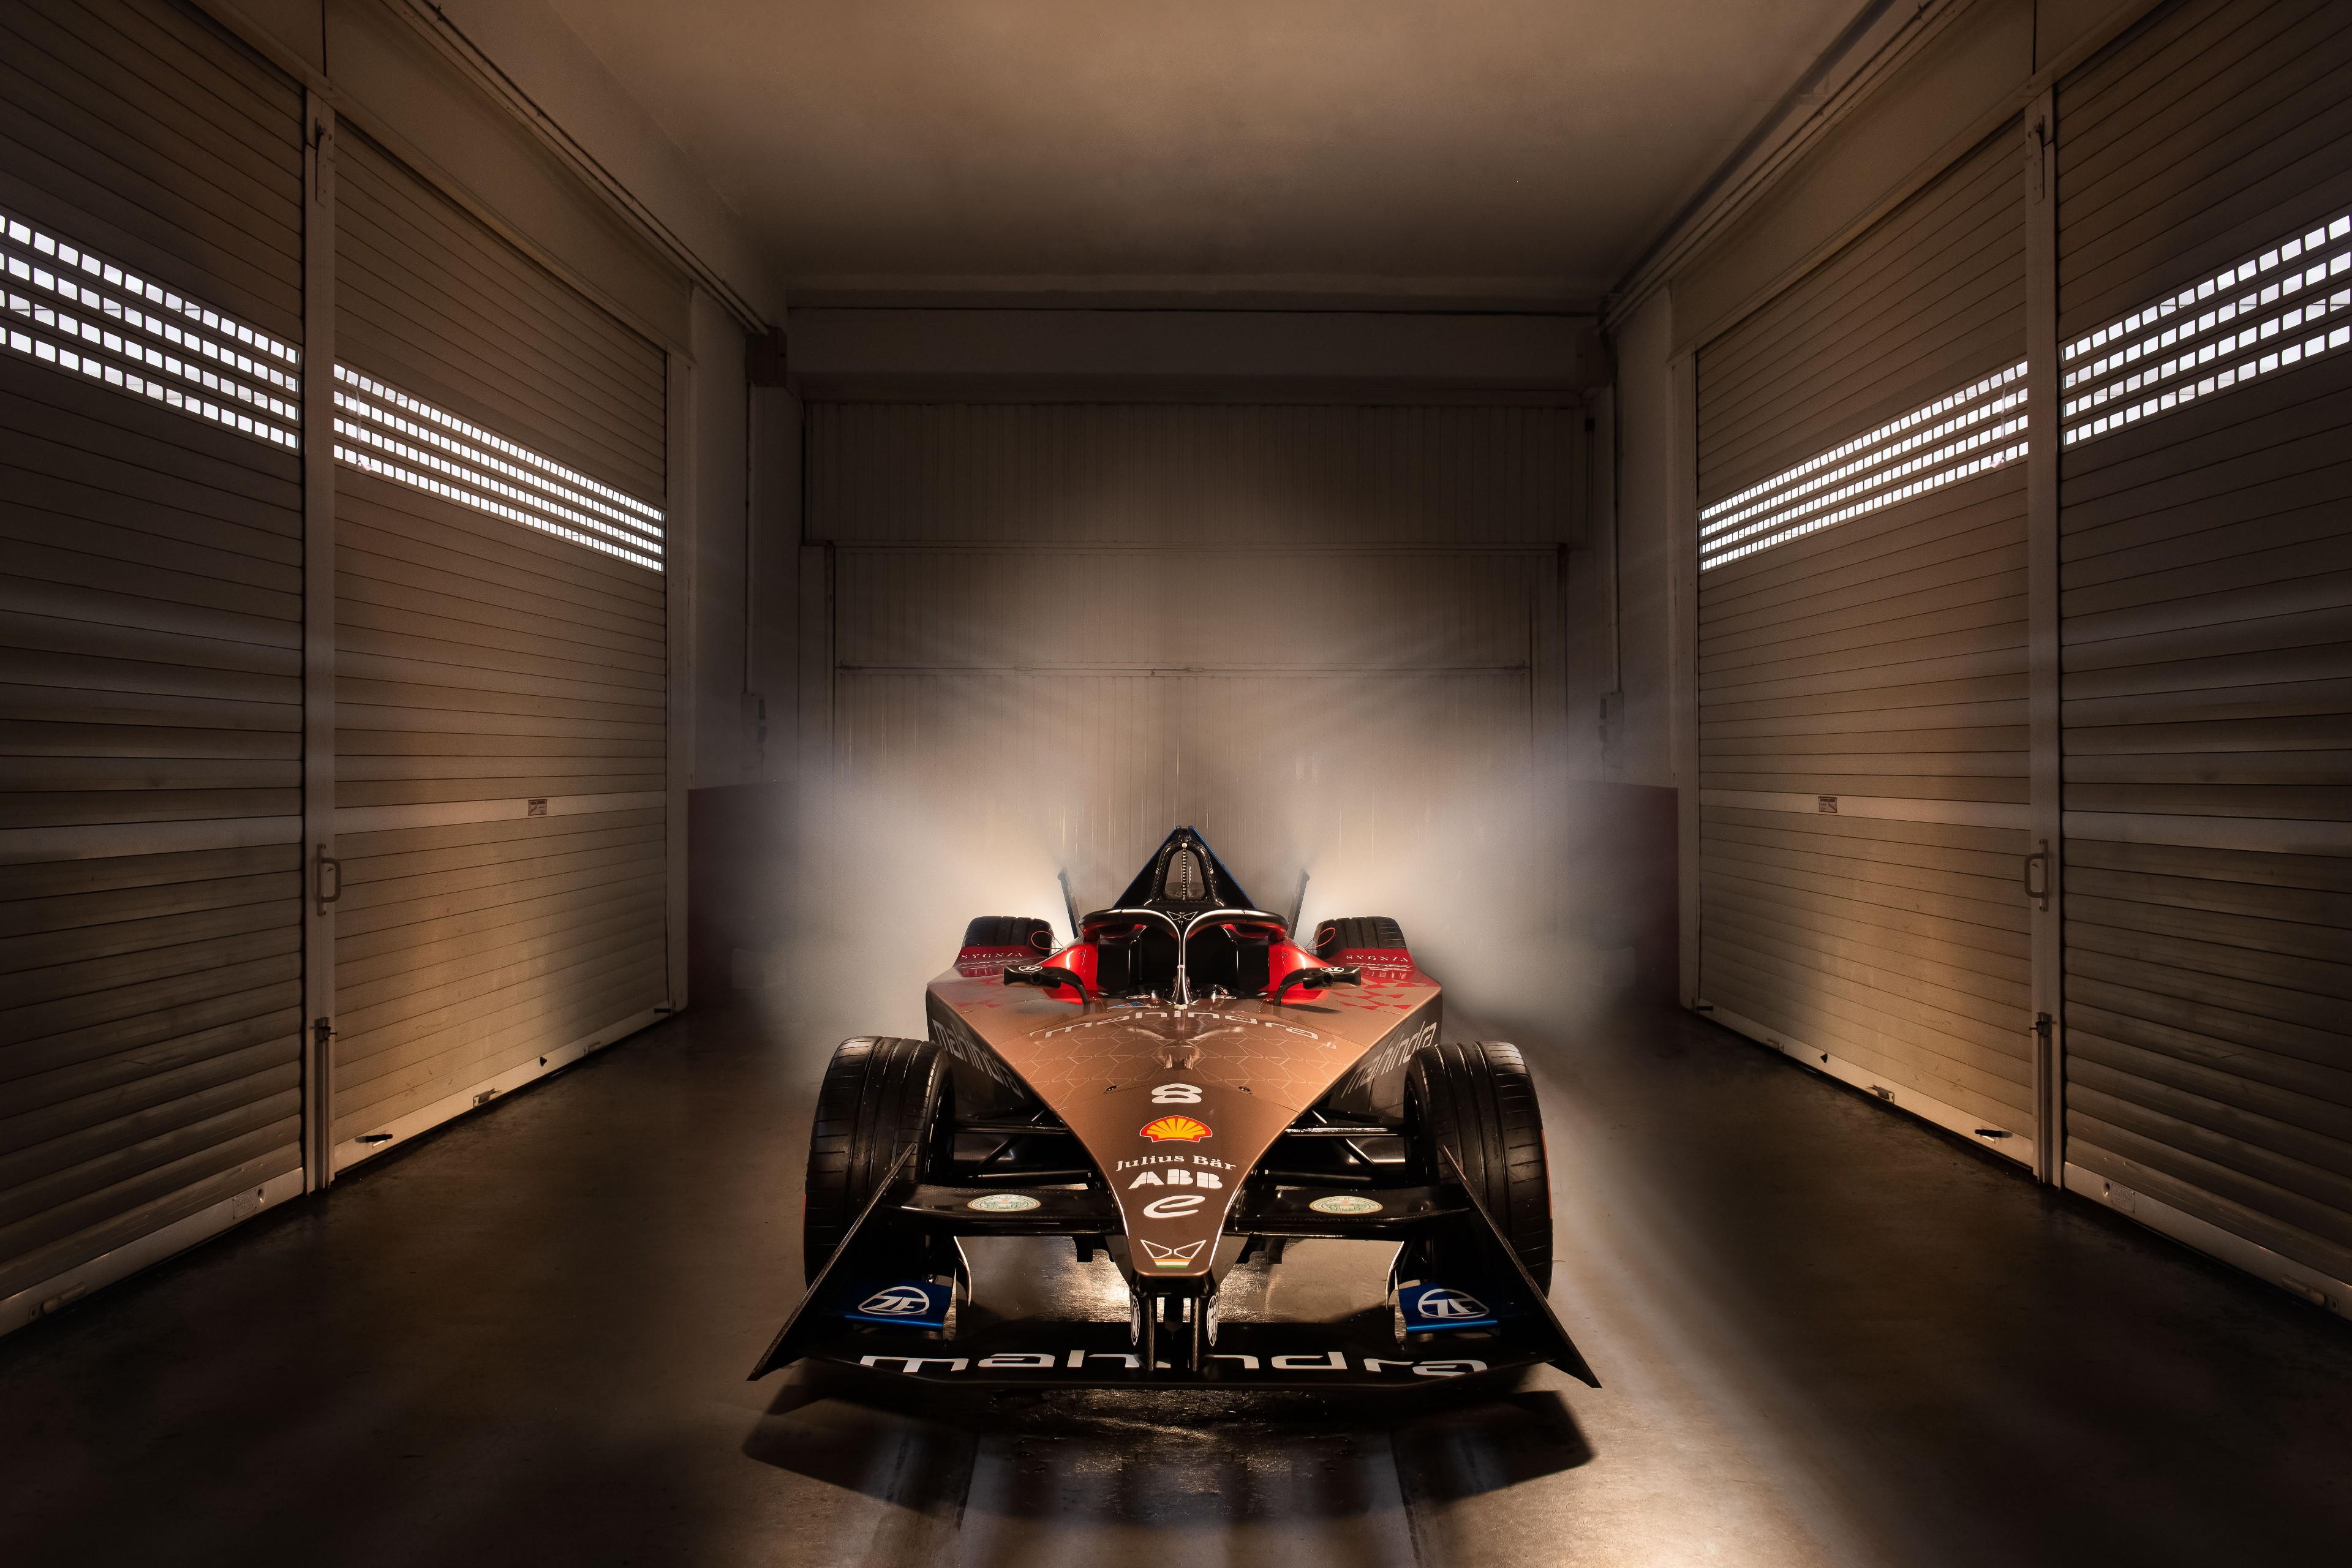 The M9 Electro will be driven by a new driver line-up, with Oliver Rowland and Lucas di Grassi behind the wheel